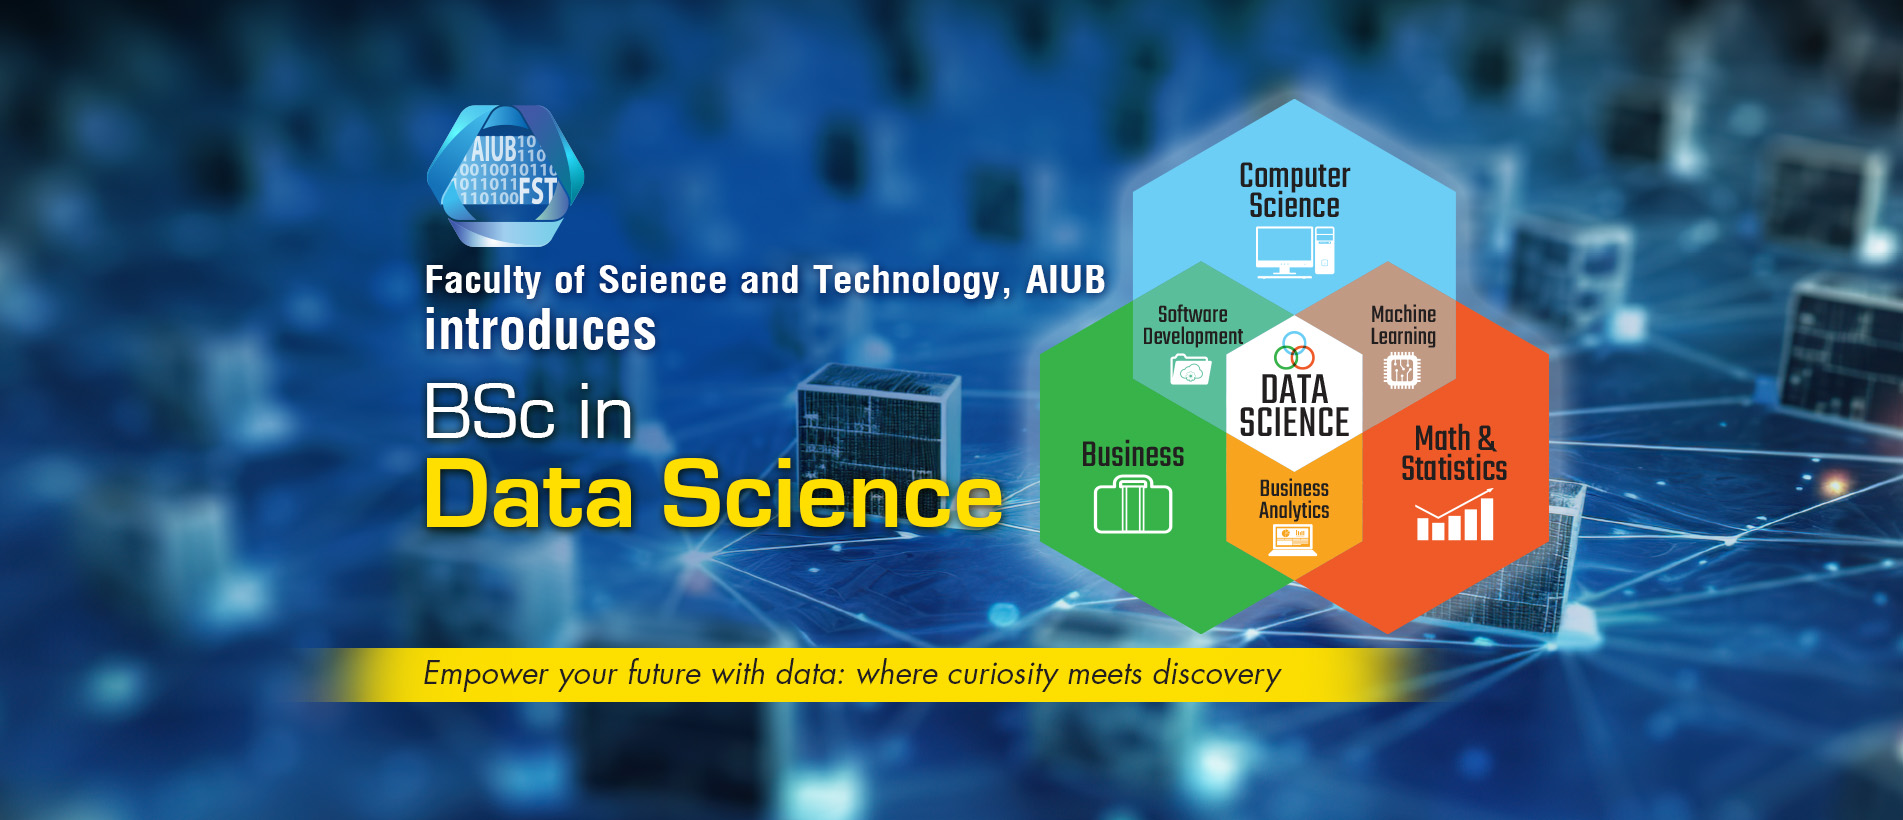 BSc in Data Science